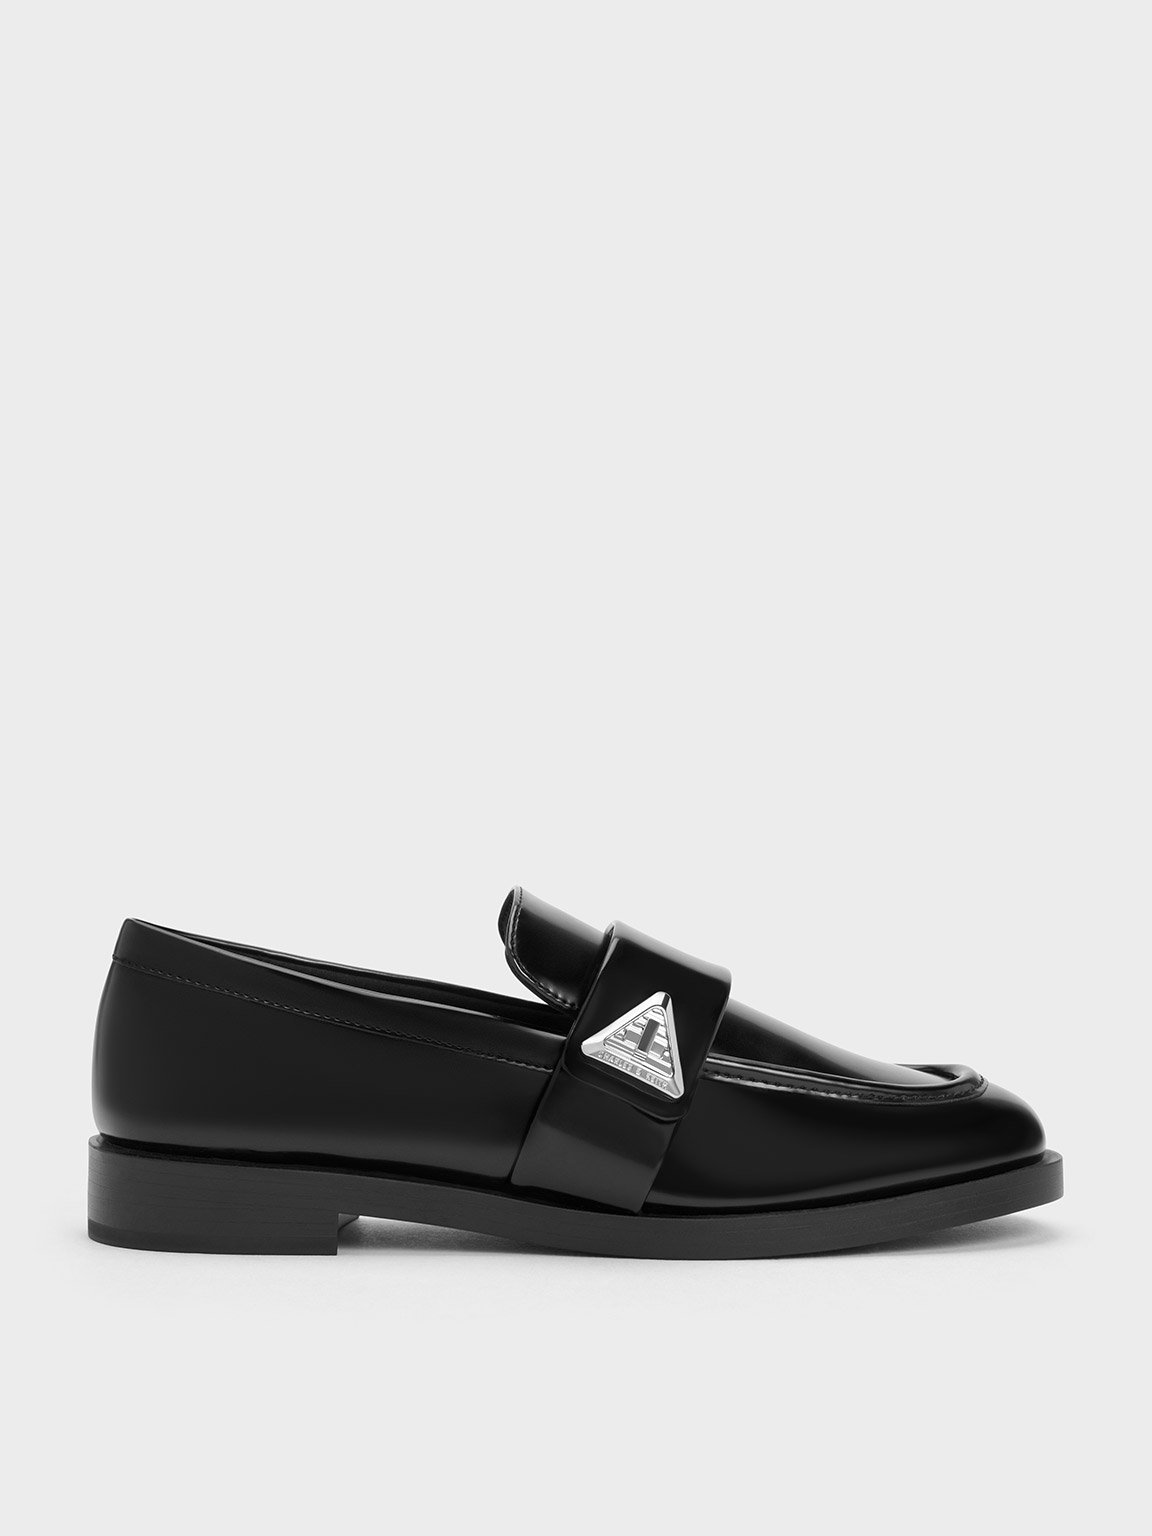 Charles & Keith Trice Metallic Accent Loafers In Black Boxed